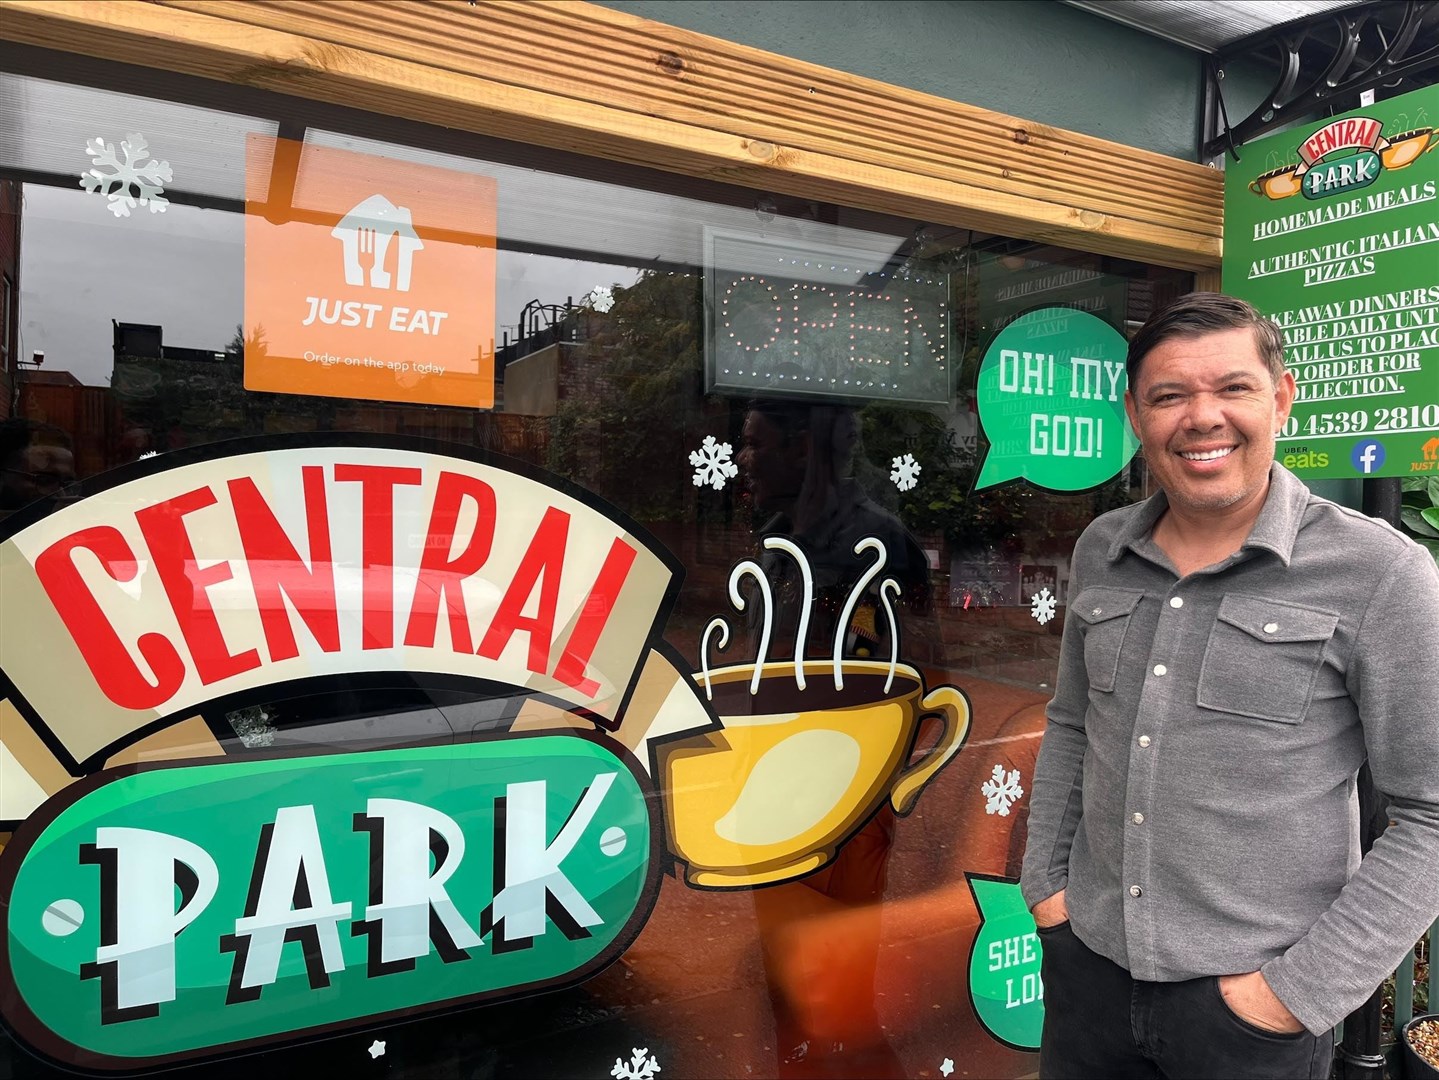 Darren, 44, owner of Central Park cafe, a Friends-themed cafe in Bexleyheath, London (Jamel Smith/PA)